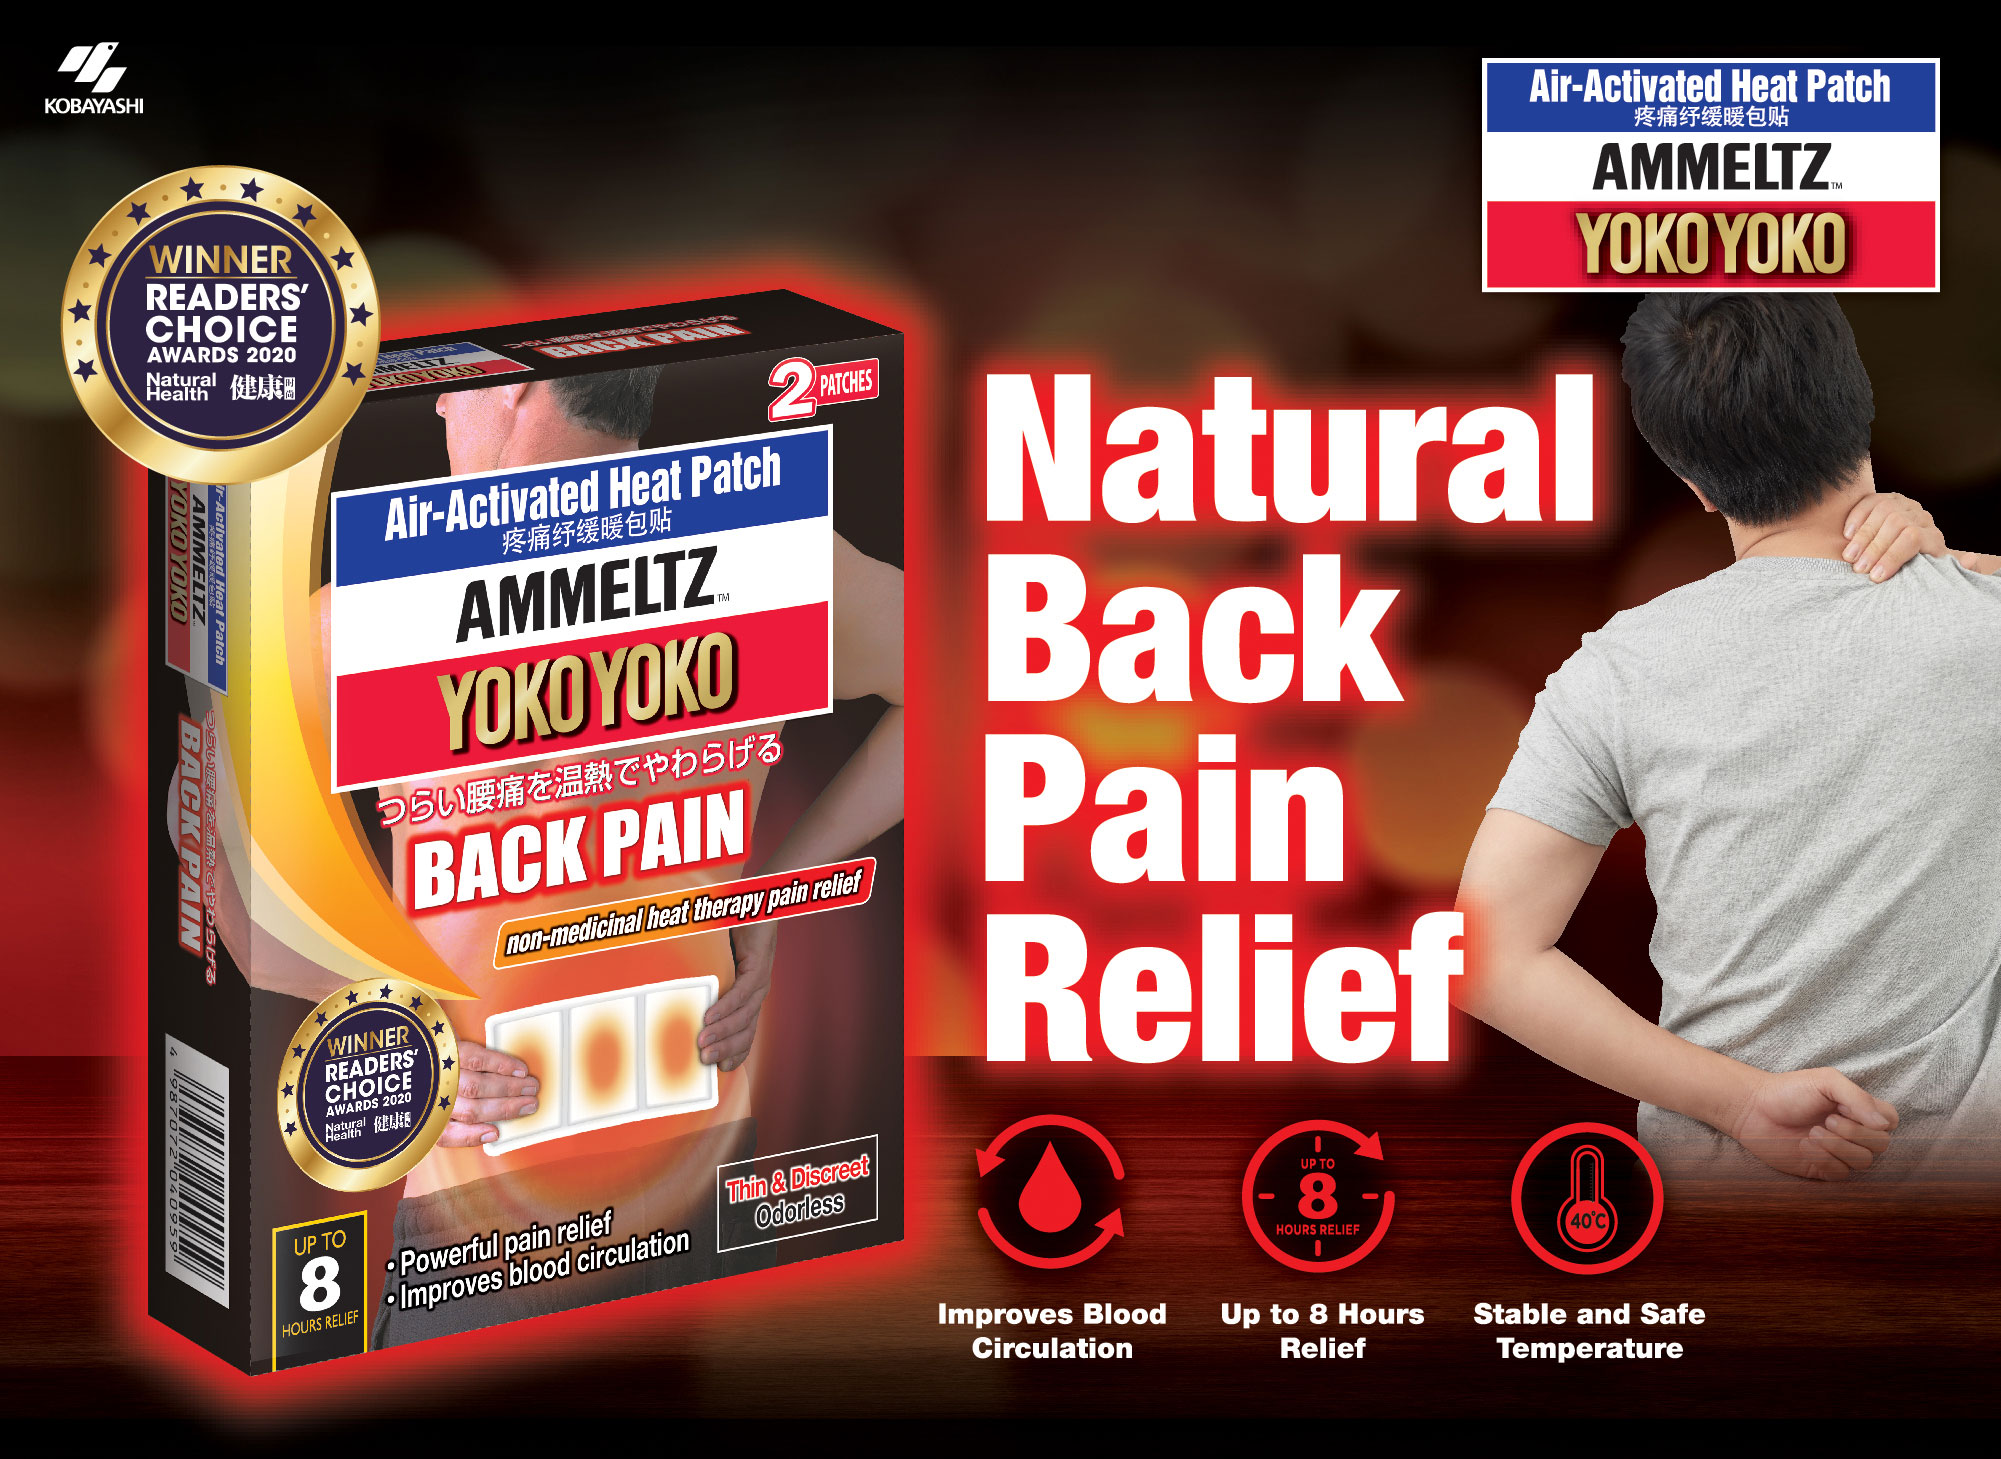 AMMELTZ YOKO YOKO AIR-ACTIVATED HEAT PATCH FOR BACK PAIN: Know Your Back Pain Problem